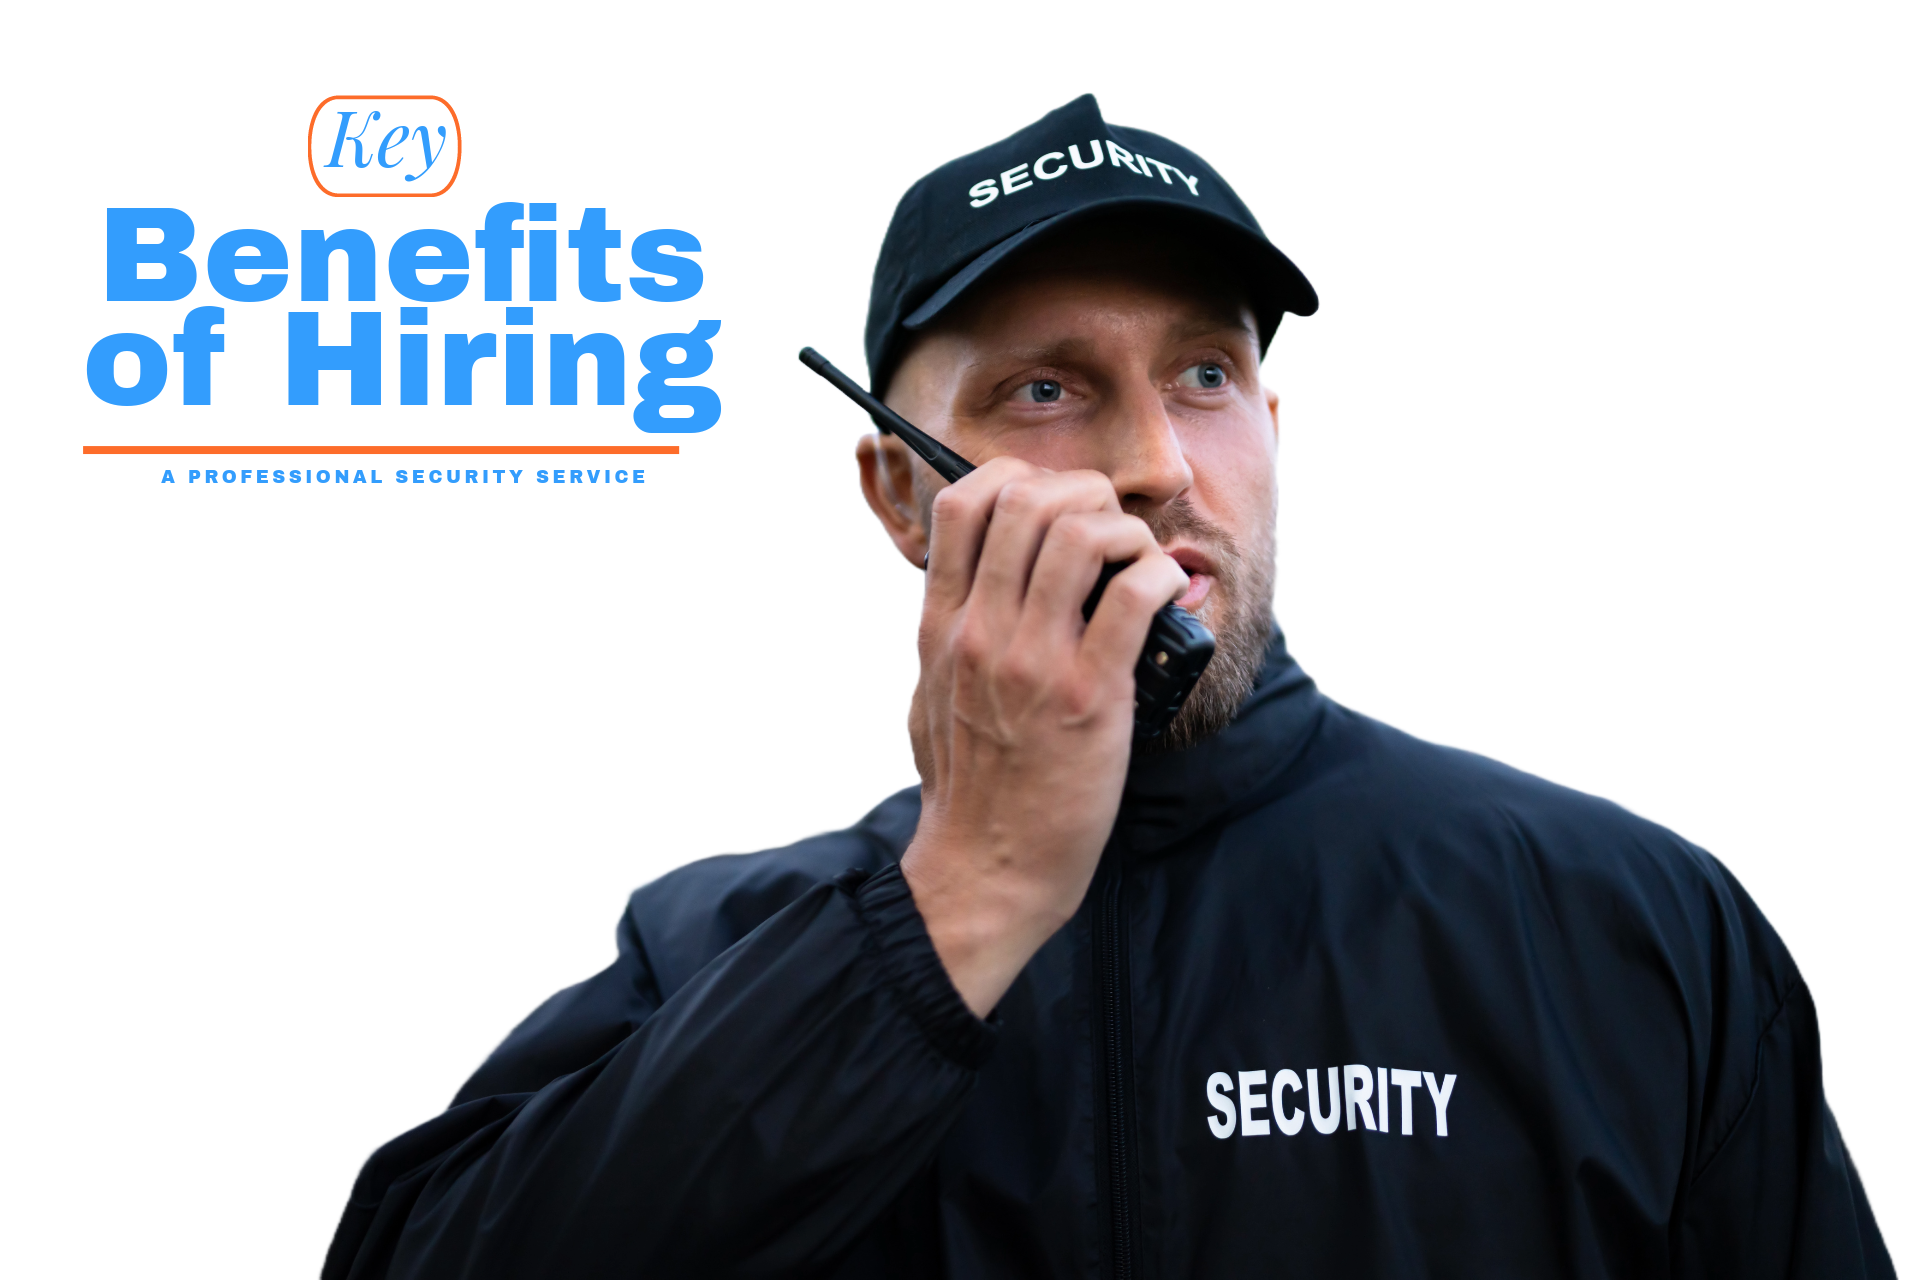 Key Benefits of Hiring a Professional Security Service